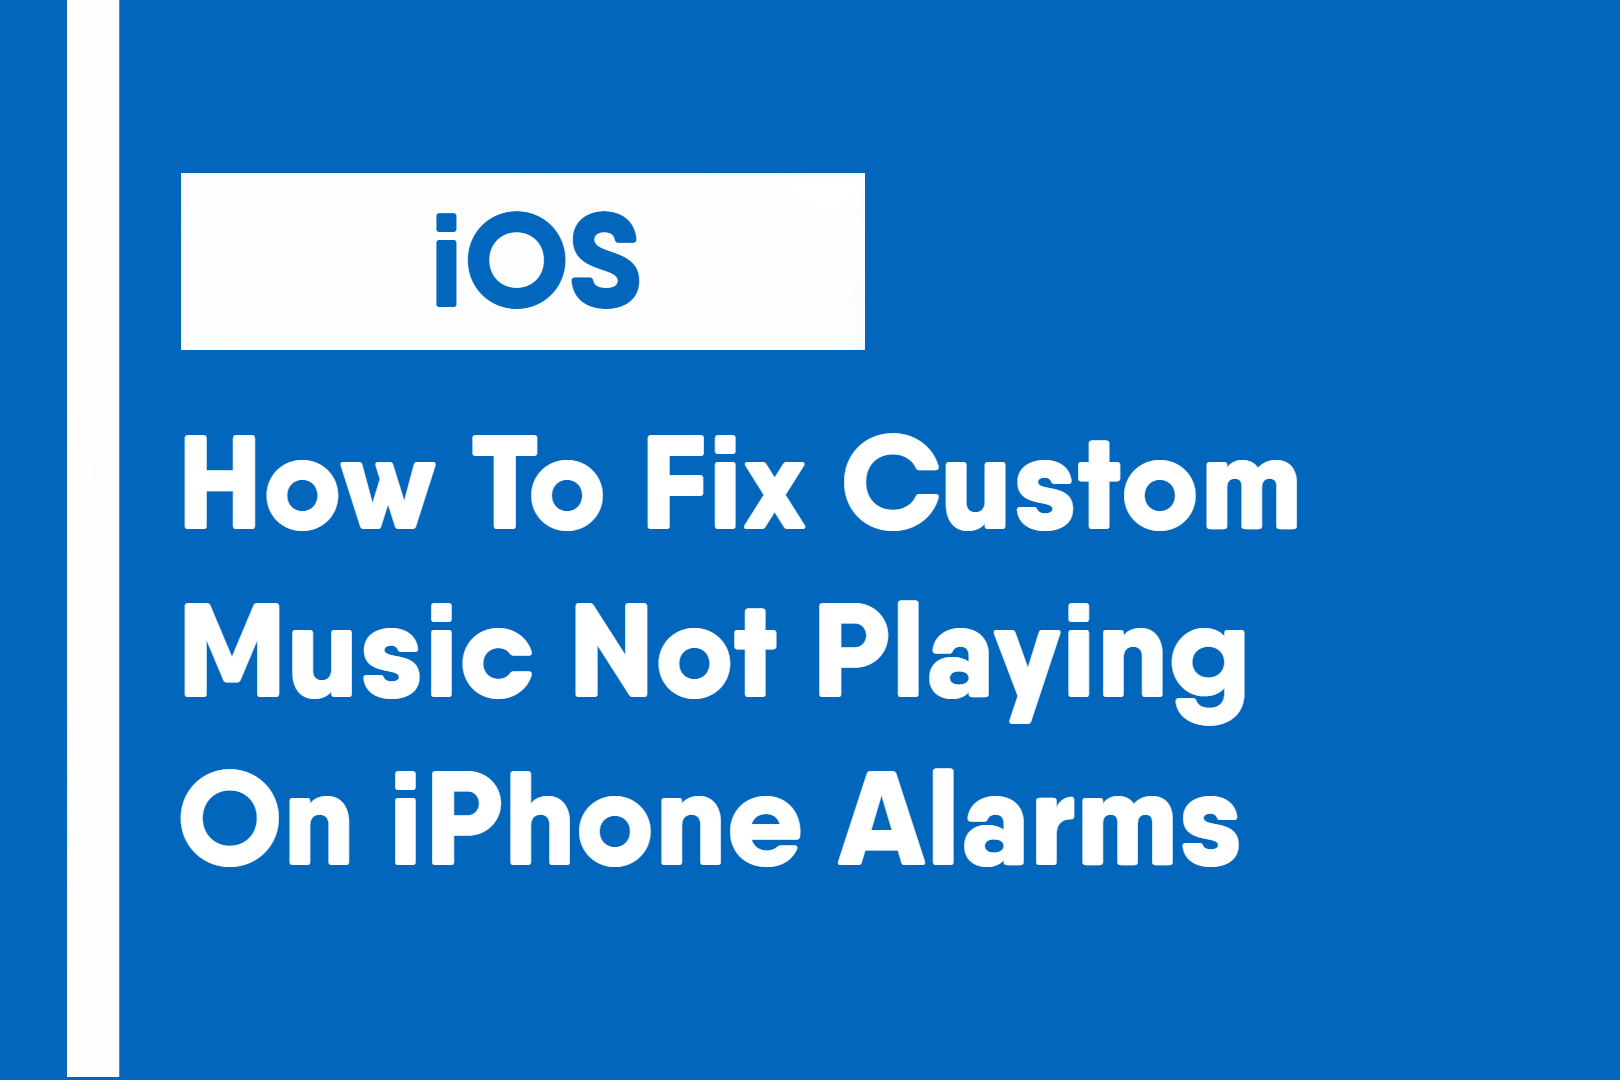 How To Fix Custom Music Not Playing On iPhone Alarms